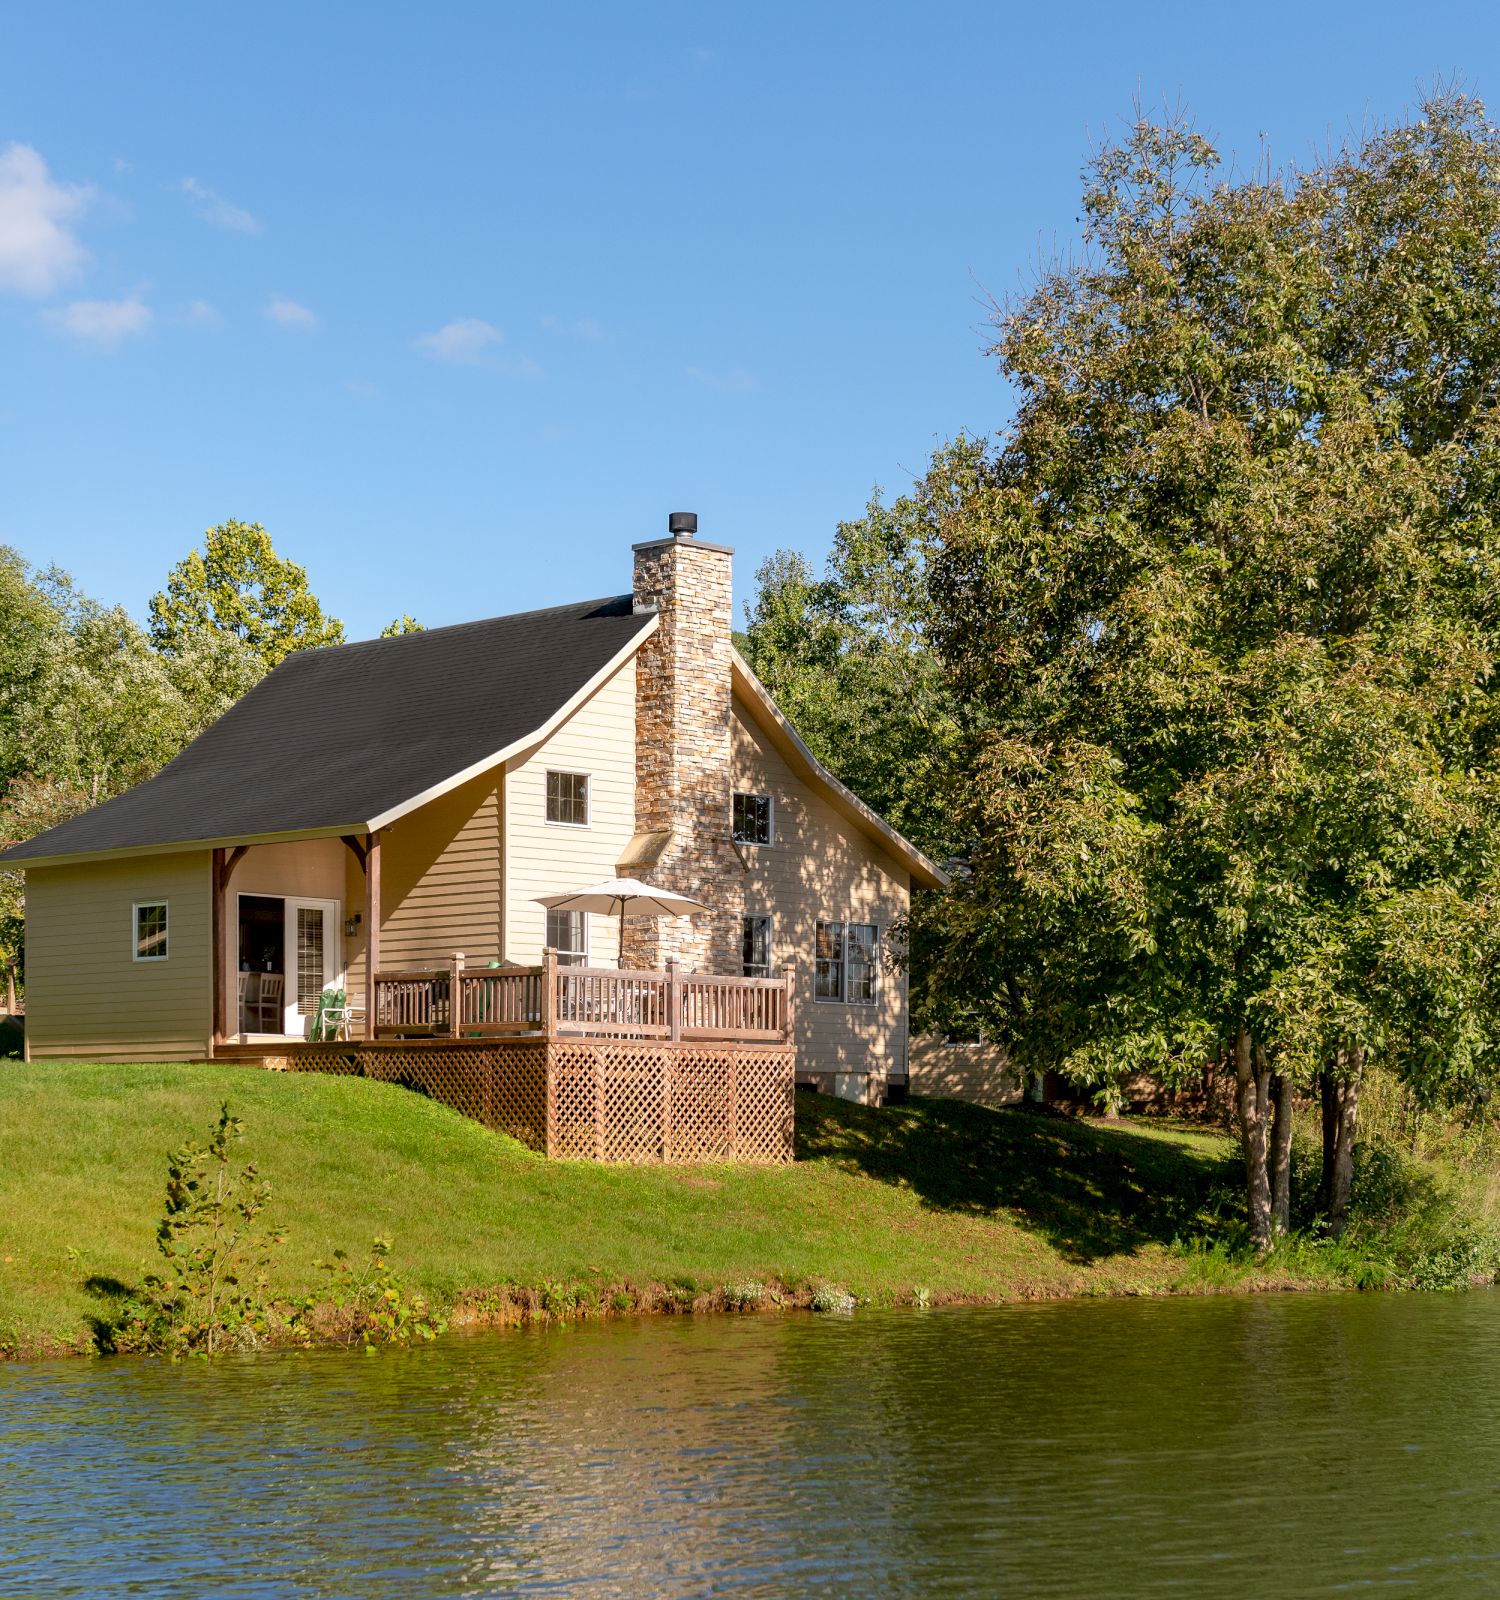 A cozy house with a chimney sits near a lake, surrounded by lush trees under a clear blue sky.